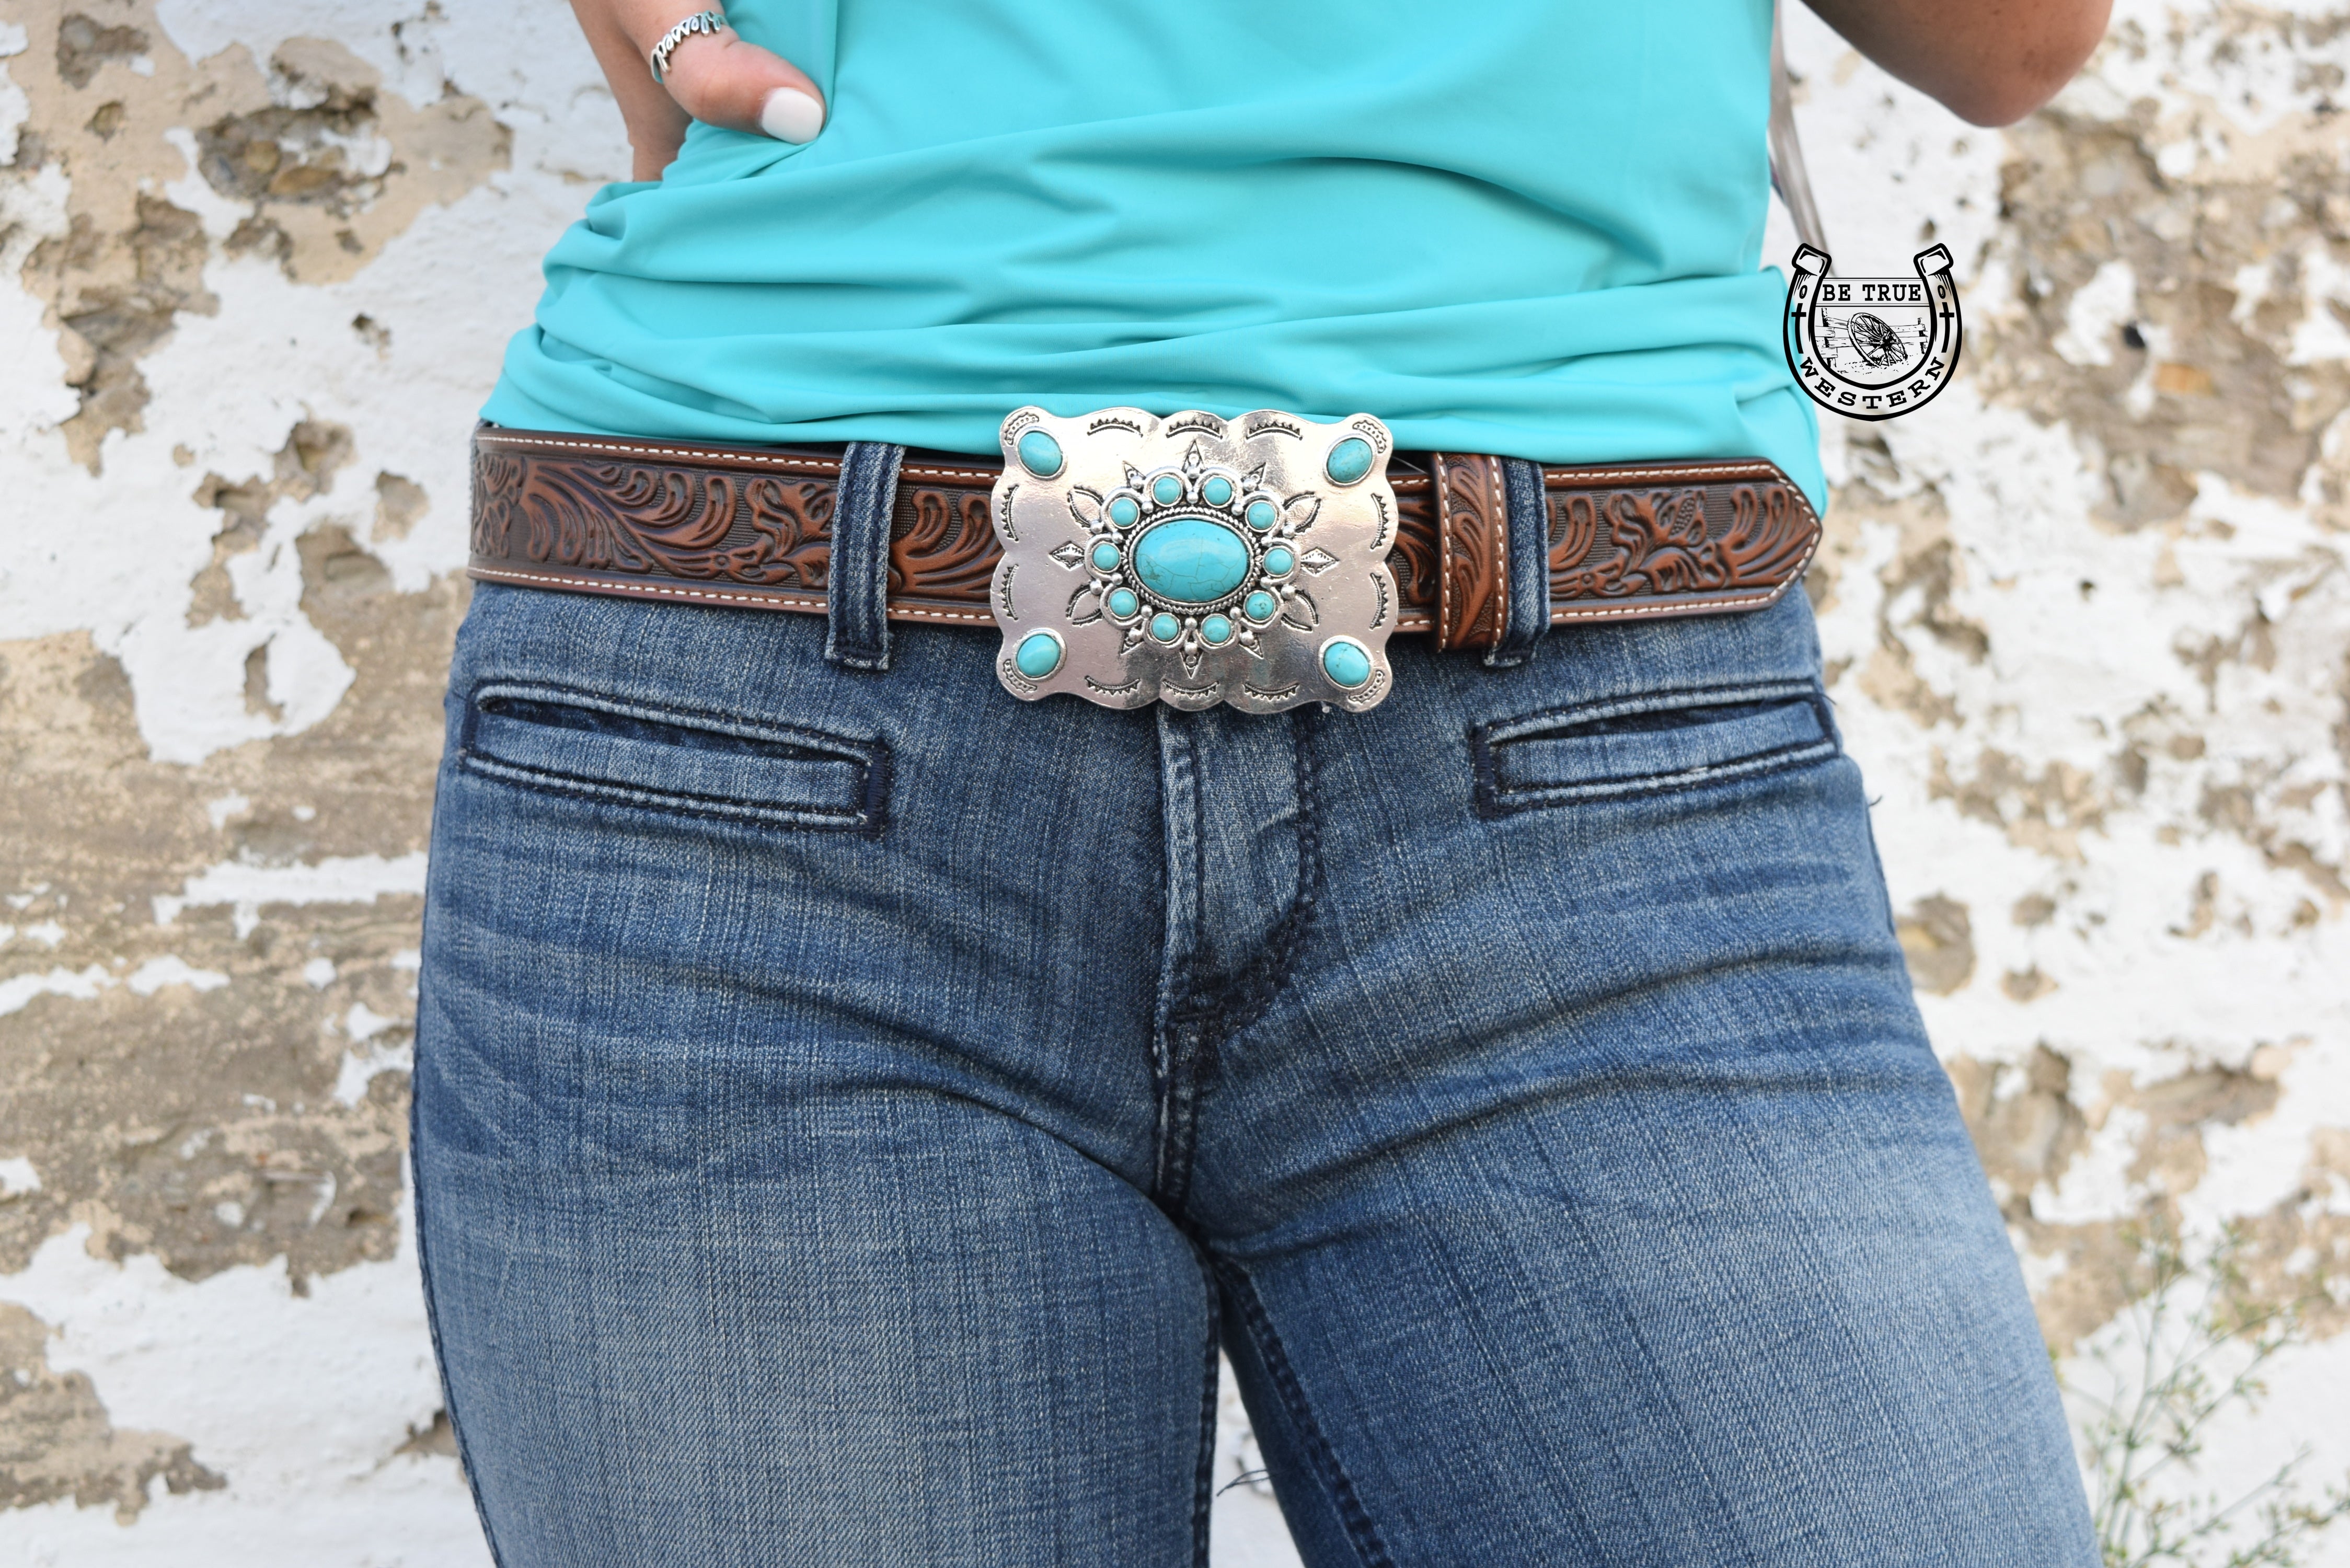 Turquoise Square Concho Chain Belt